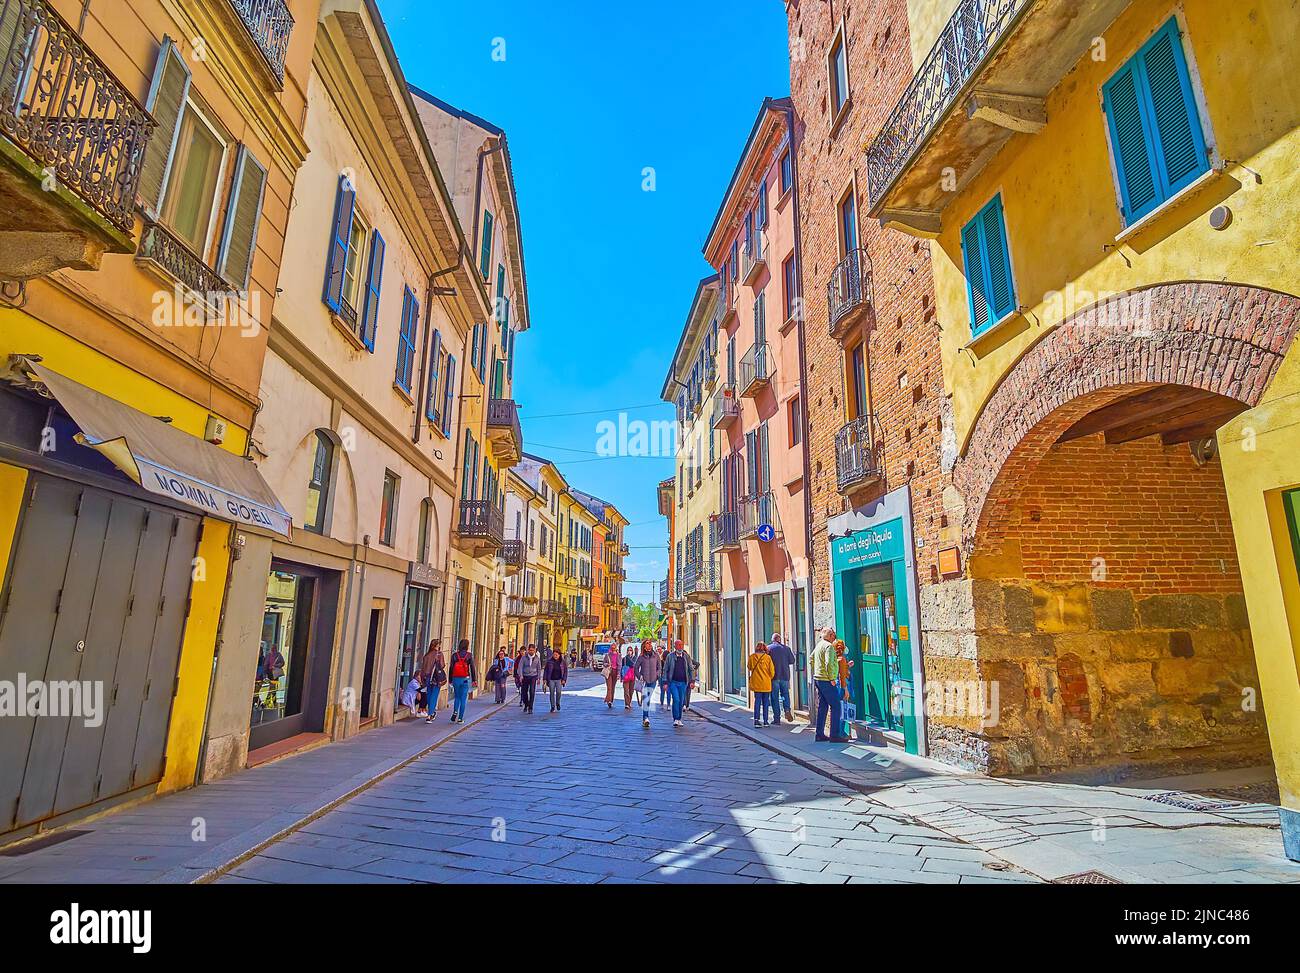 PAVIA, ITALY - APRIL 9, 2022: Strada Nuova is a modern street in the heart of old town with scenic medeival mansions, on April 9 in Pavia, Italy Stock Photo